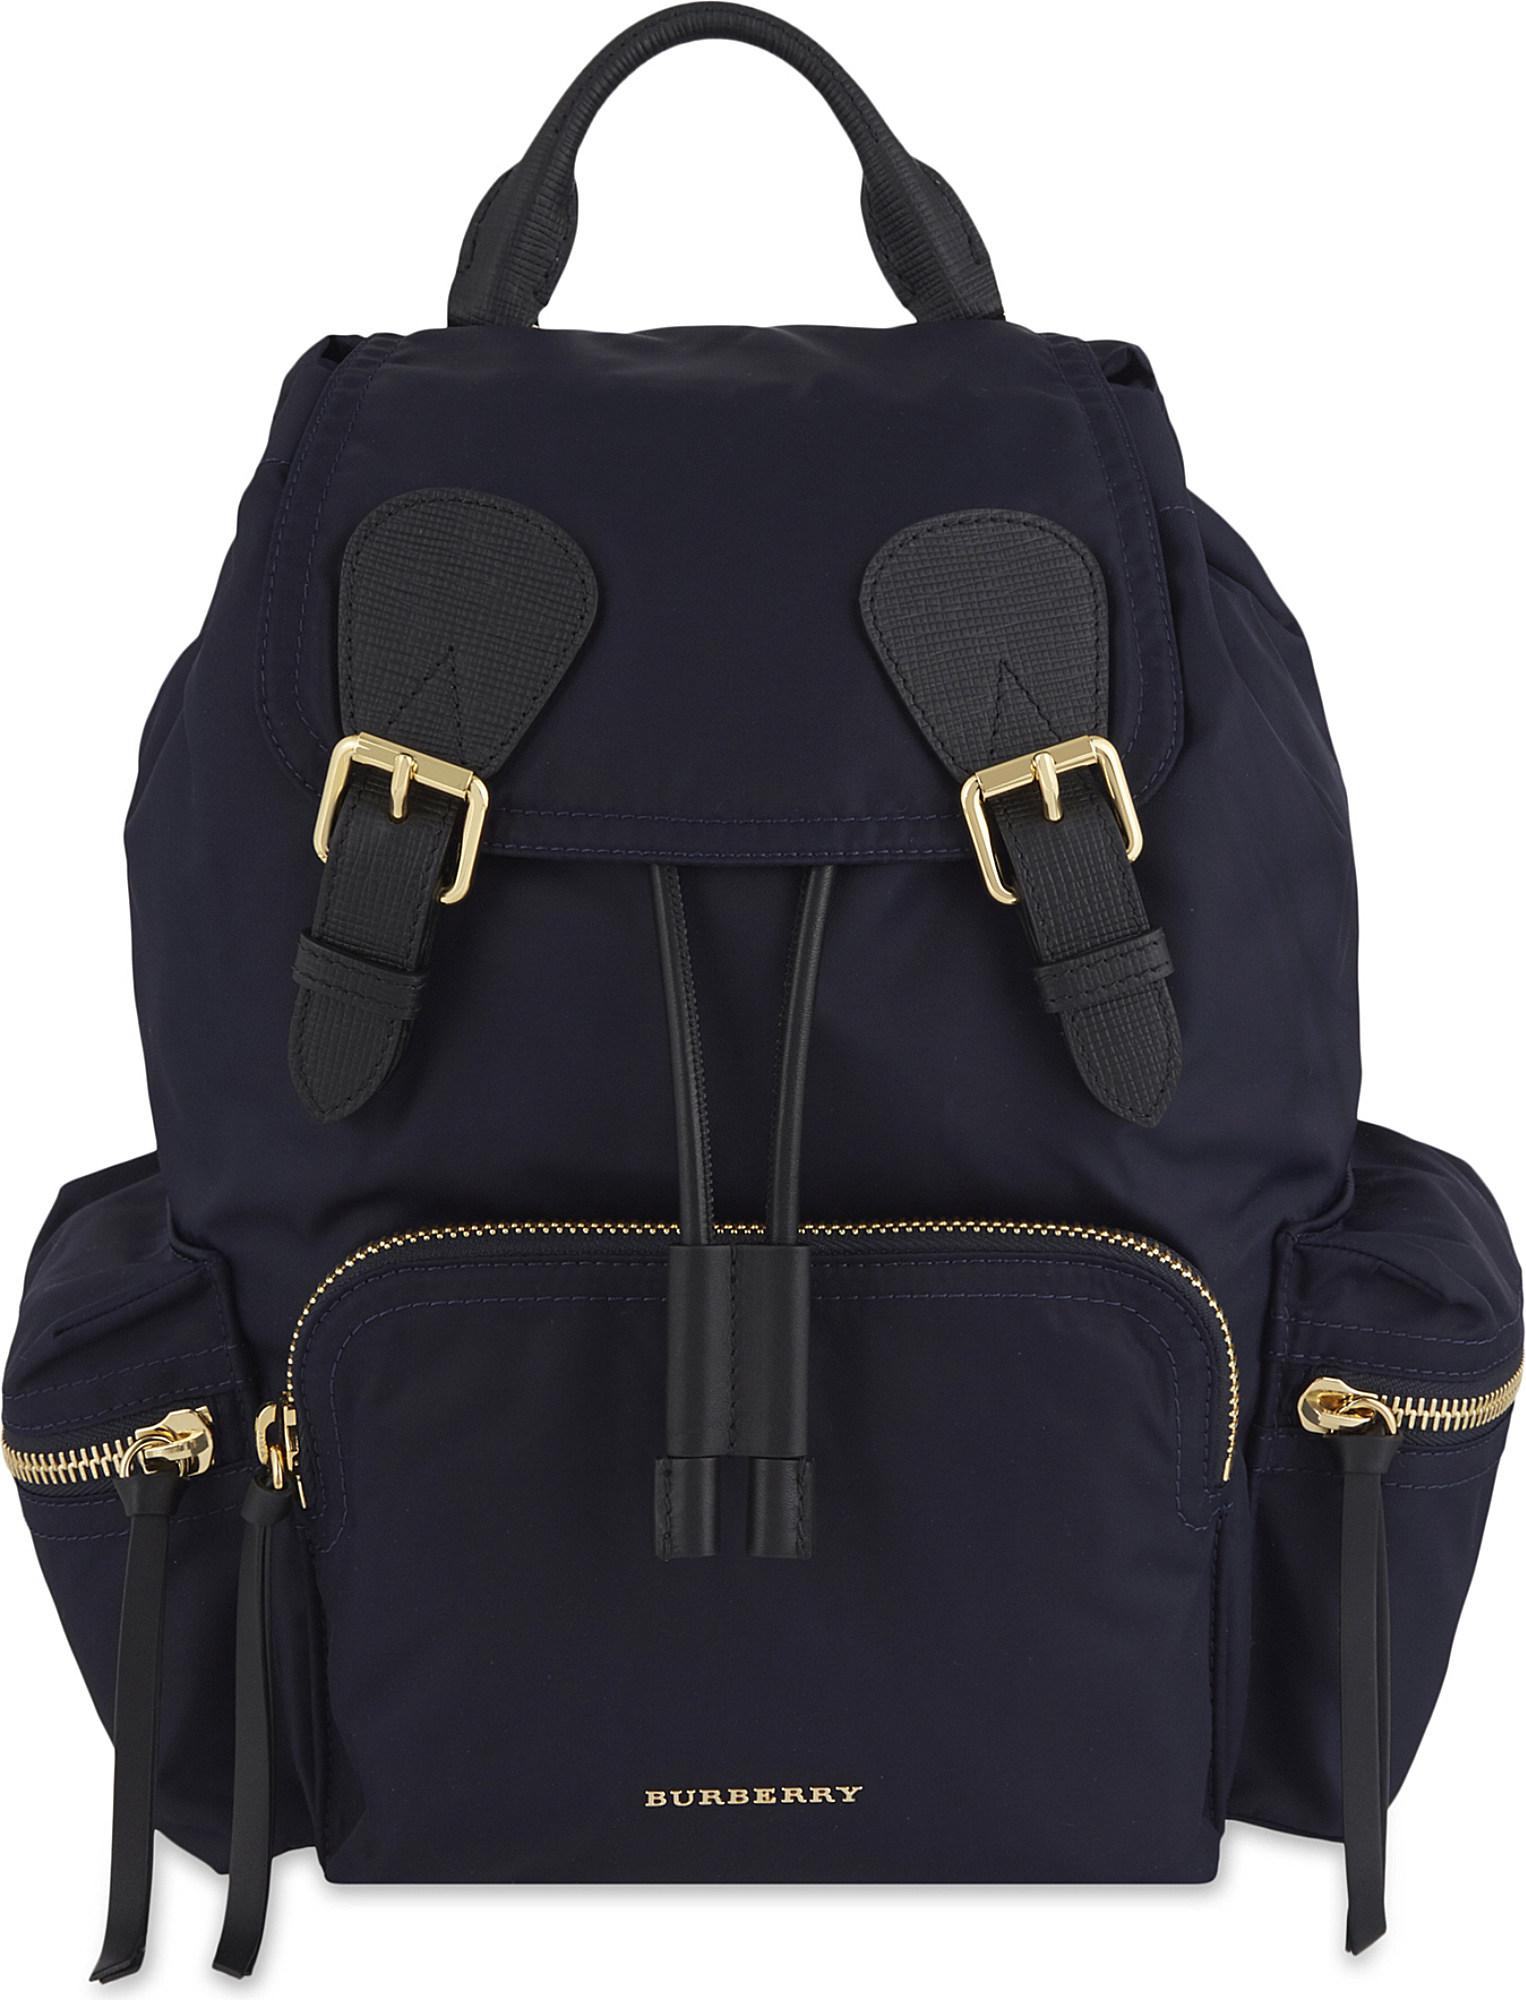 Lyst - Burberry Medium Nylon Backpack in Blue - Save 19.19642857142857%